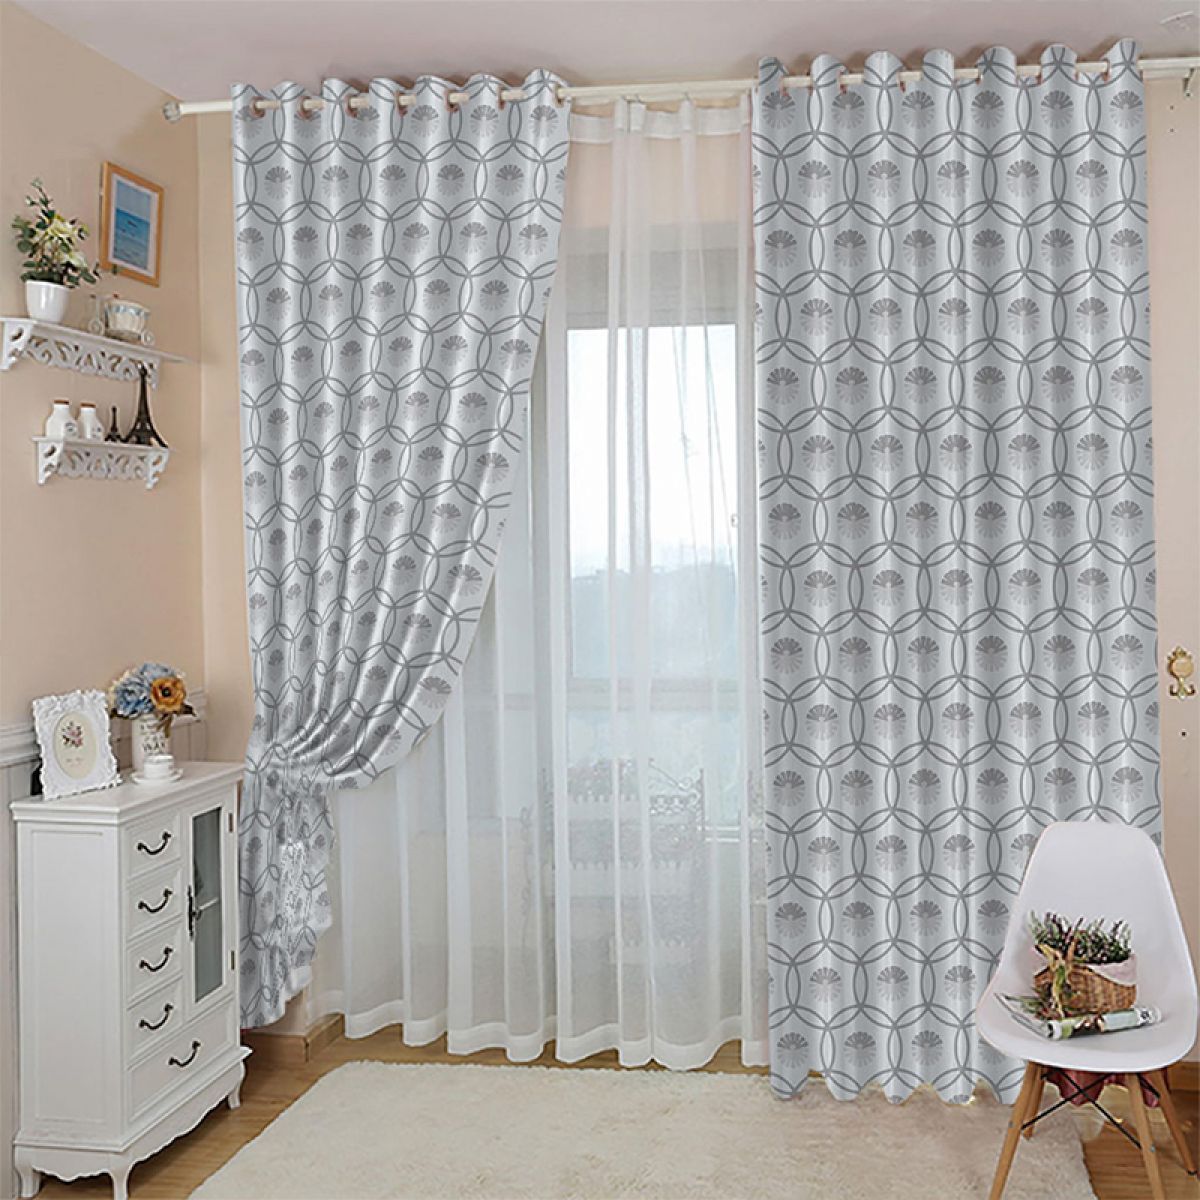 3d intersecting circles printed window curtain home decor 5078